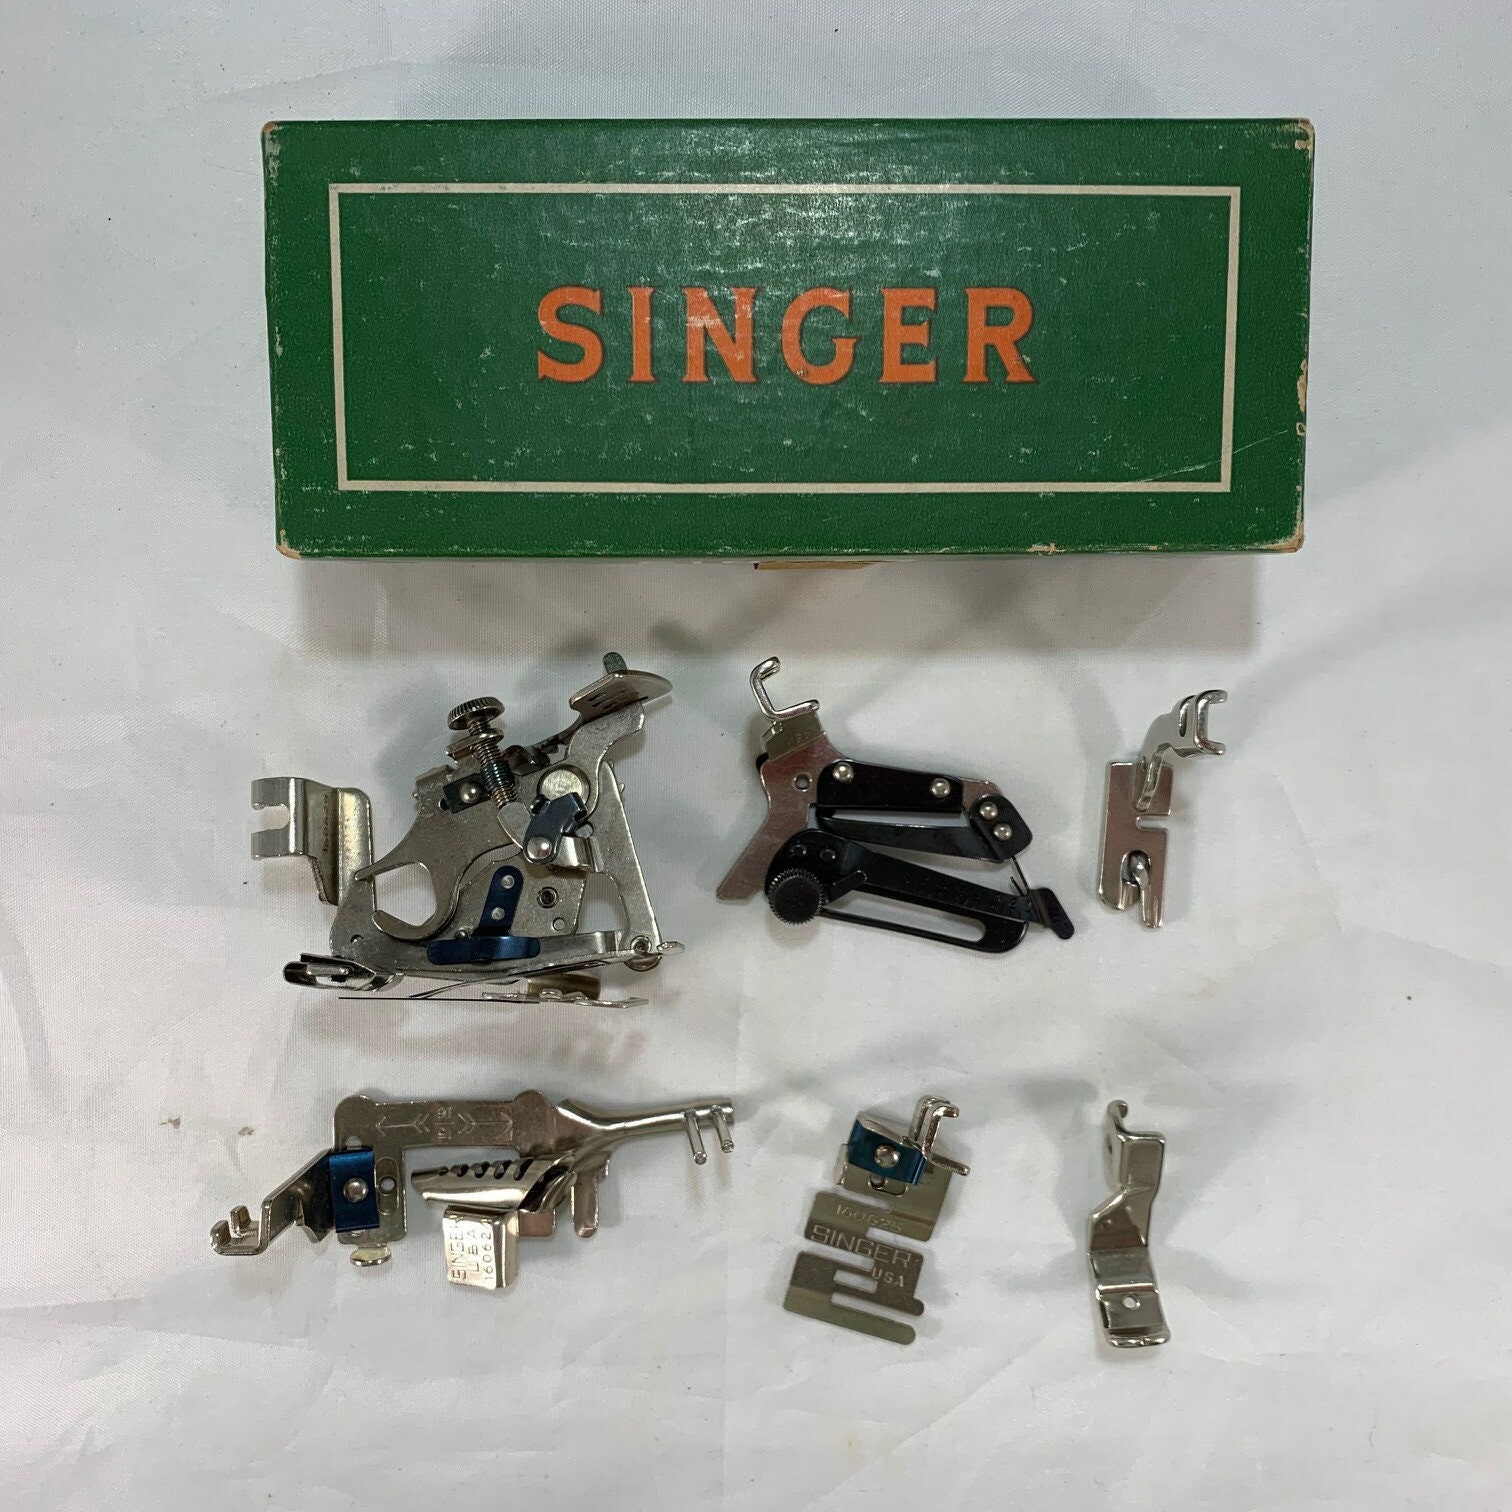 Singer 301 Sewing Machine Upper Thread Guide for Needle Bar Simanco Part  170133